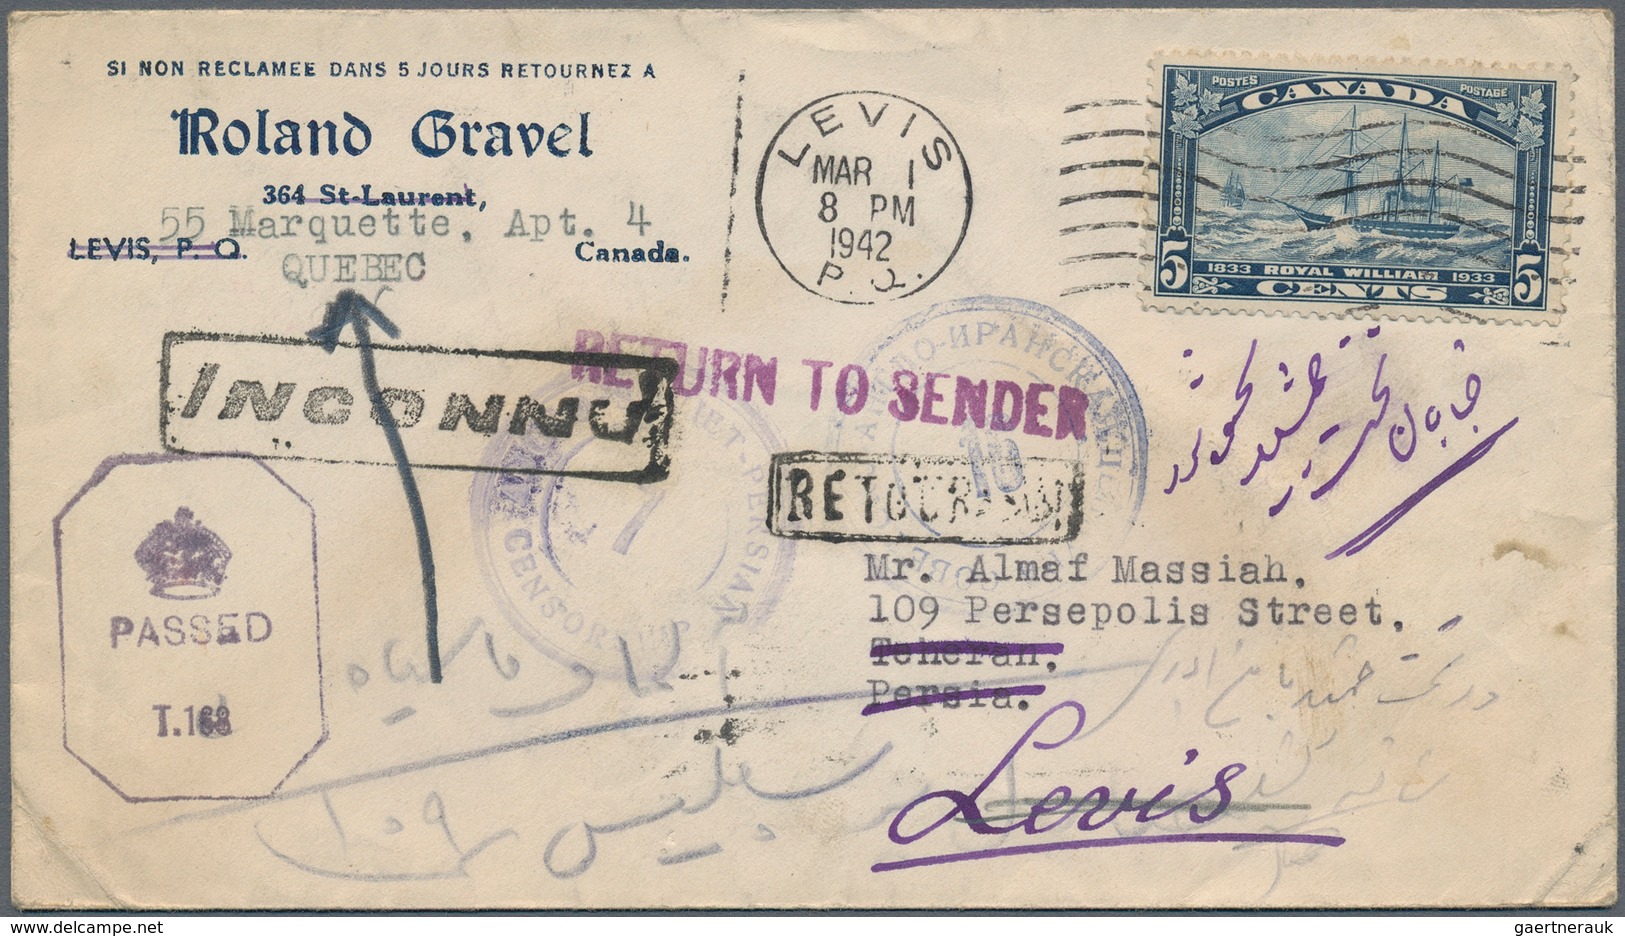 Kanada: 1902/2000 (ca.) holding of about 350 letters, cards and covers, including many covers from t